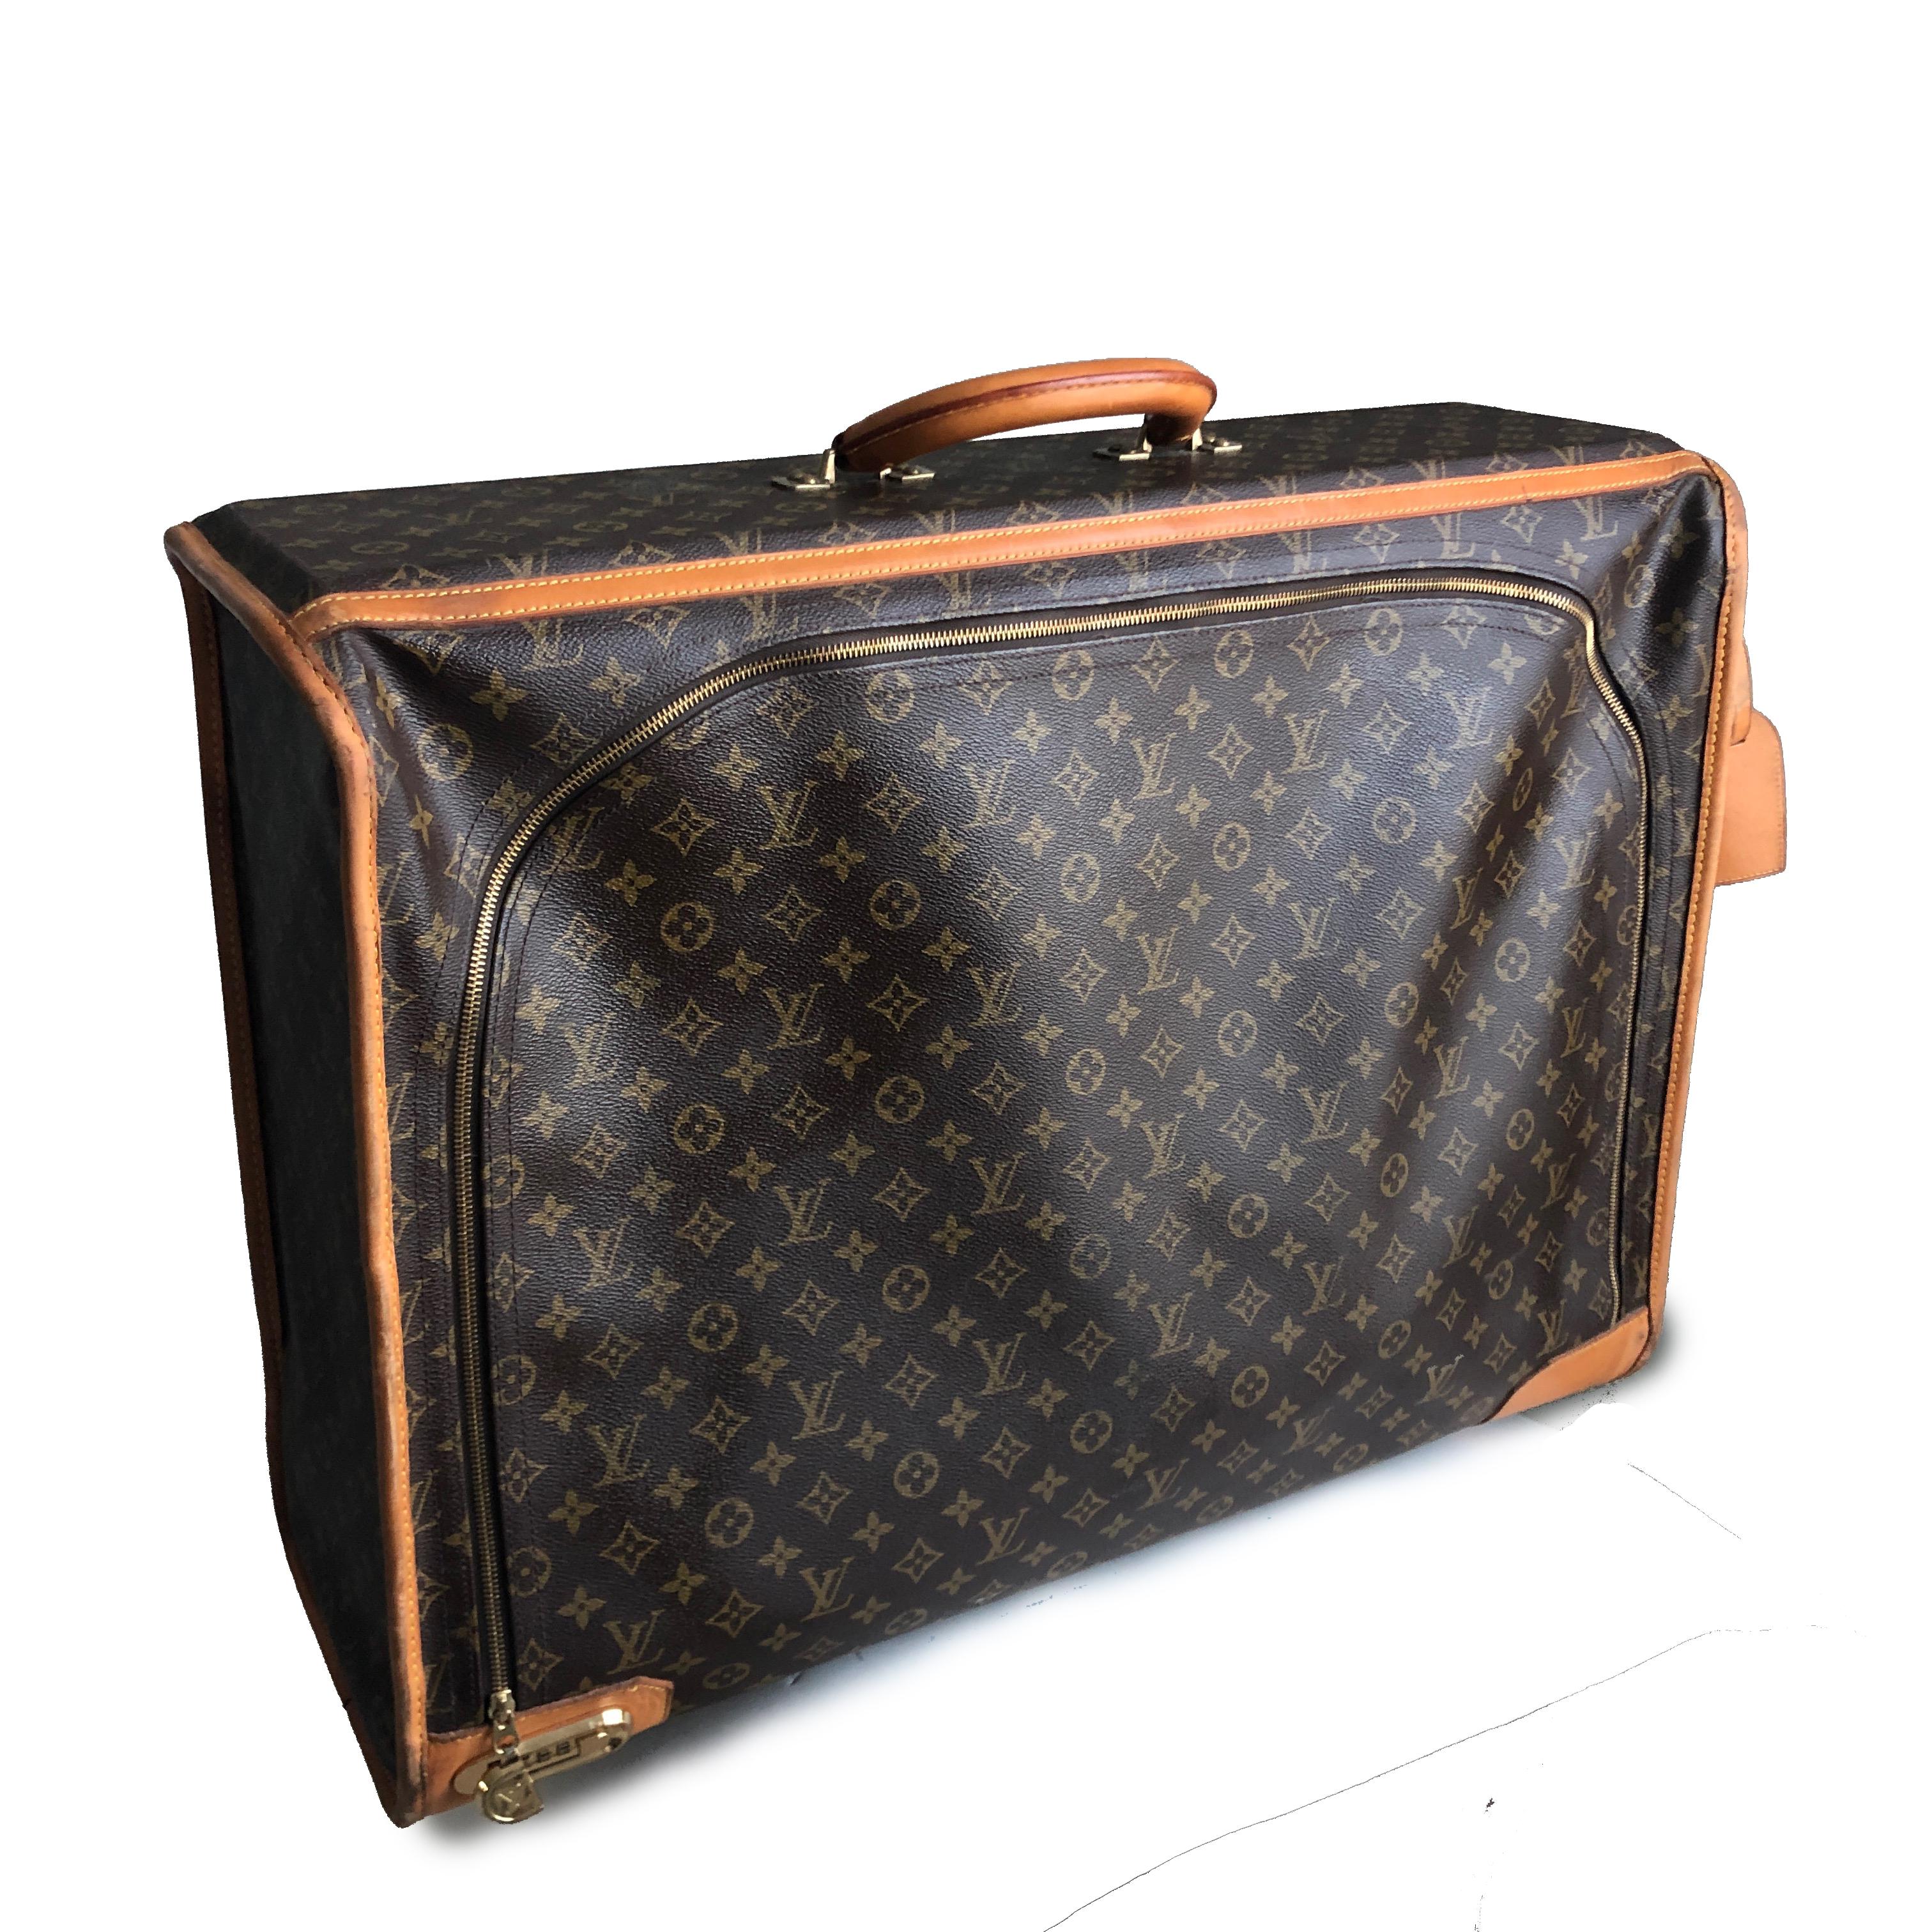 Louis Vuitton Malletier Stamp - For Sale on 1stDibs